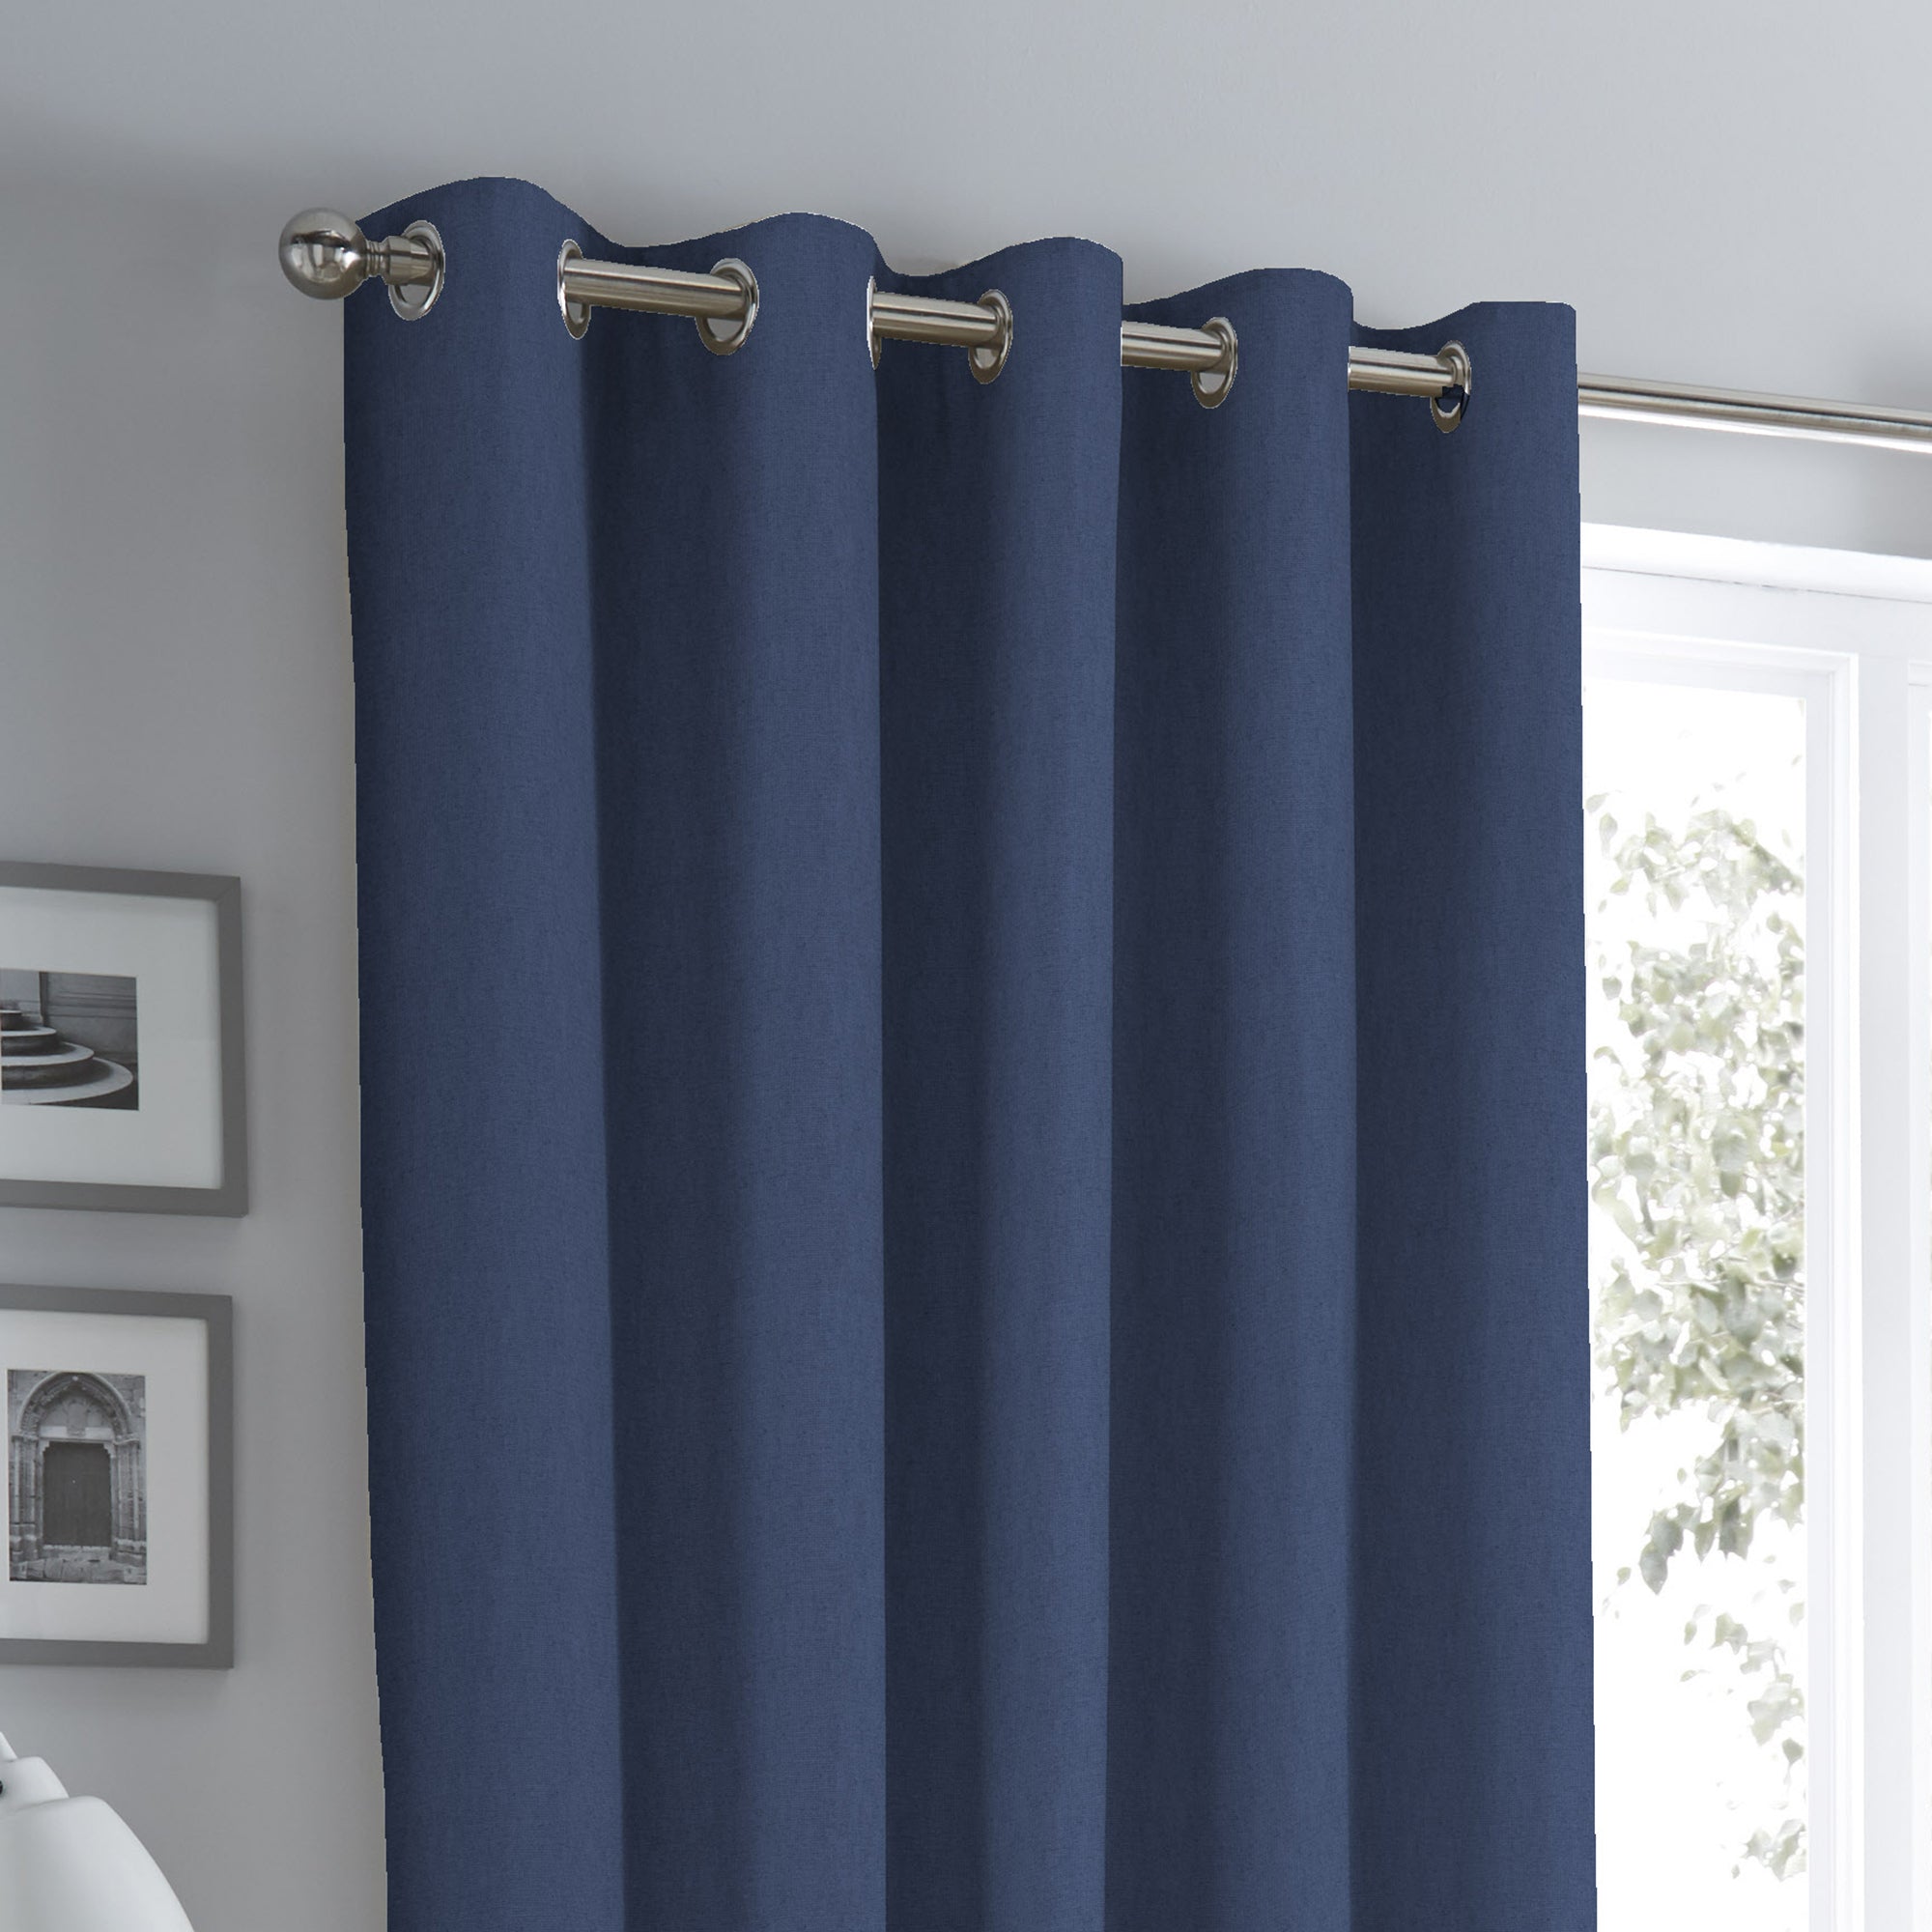 Sorbonne - 100% Cotton Lined Eyelet Curtains in Navy - by Fusion